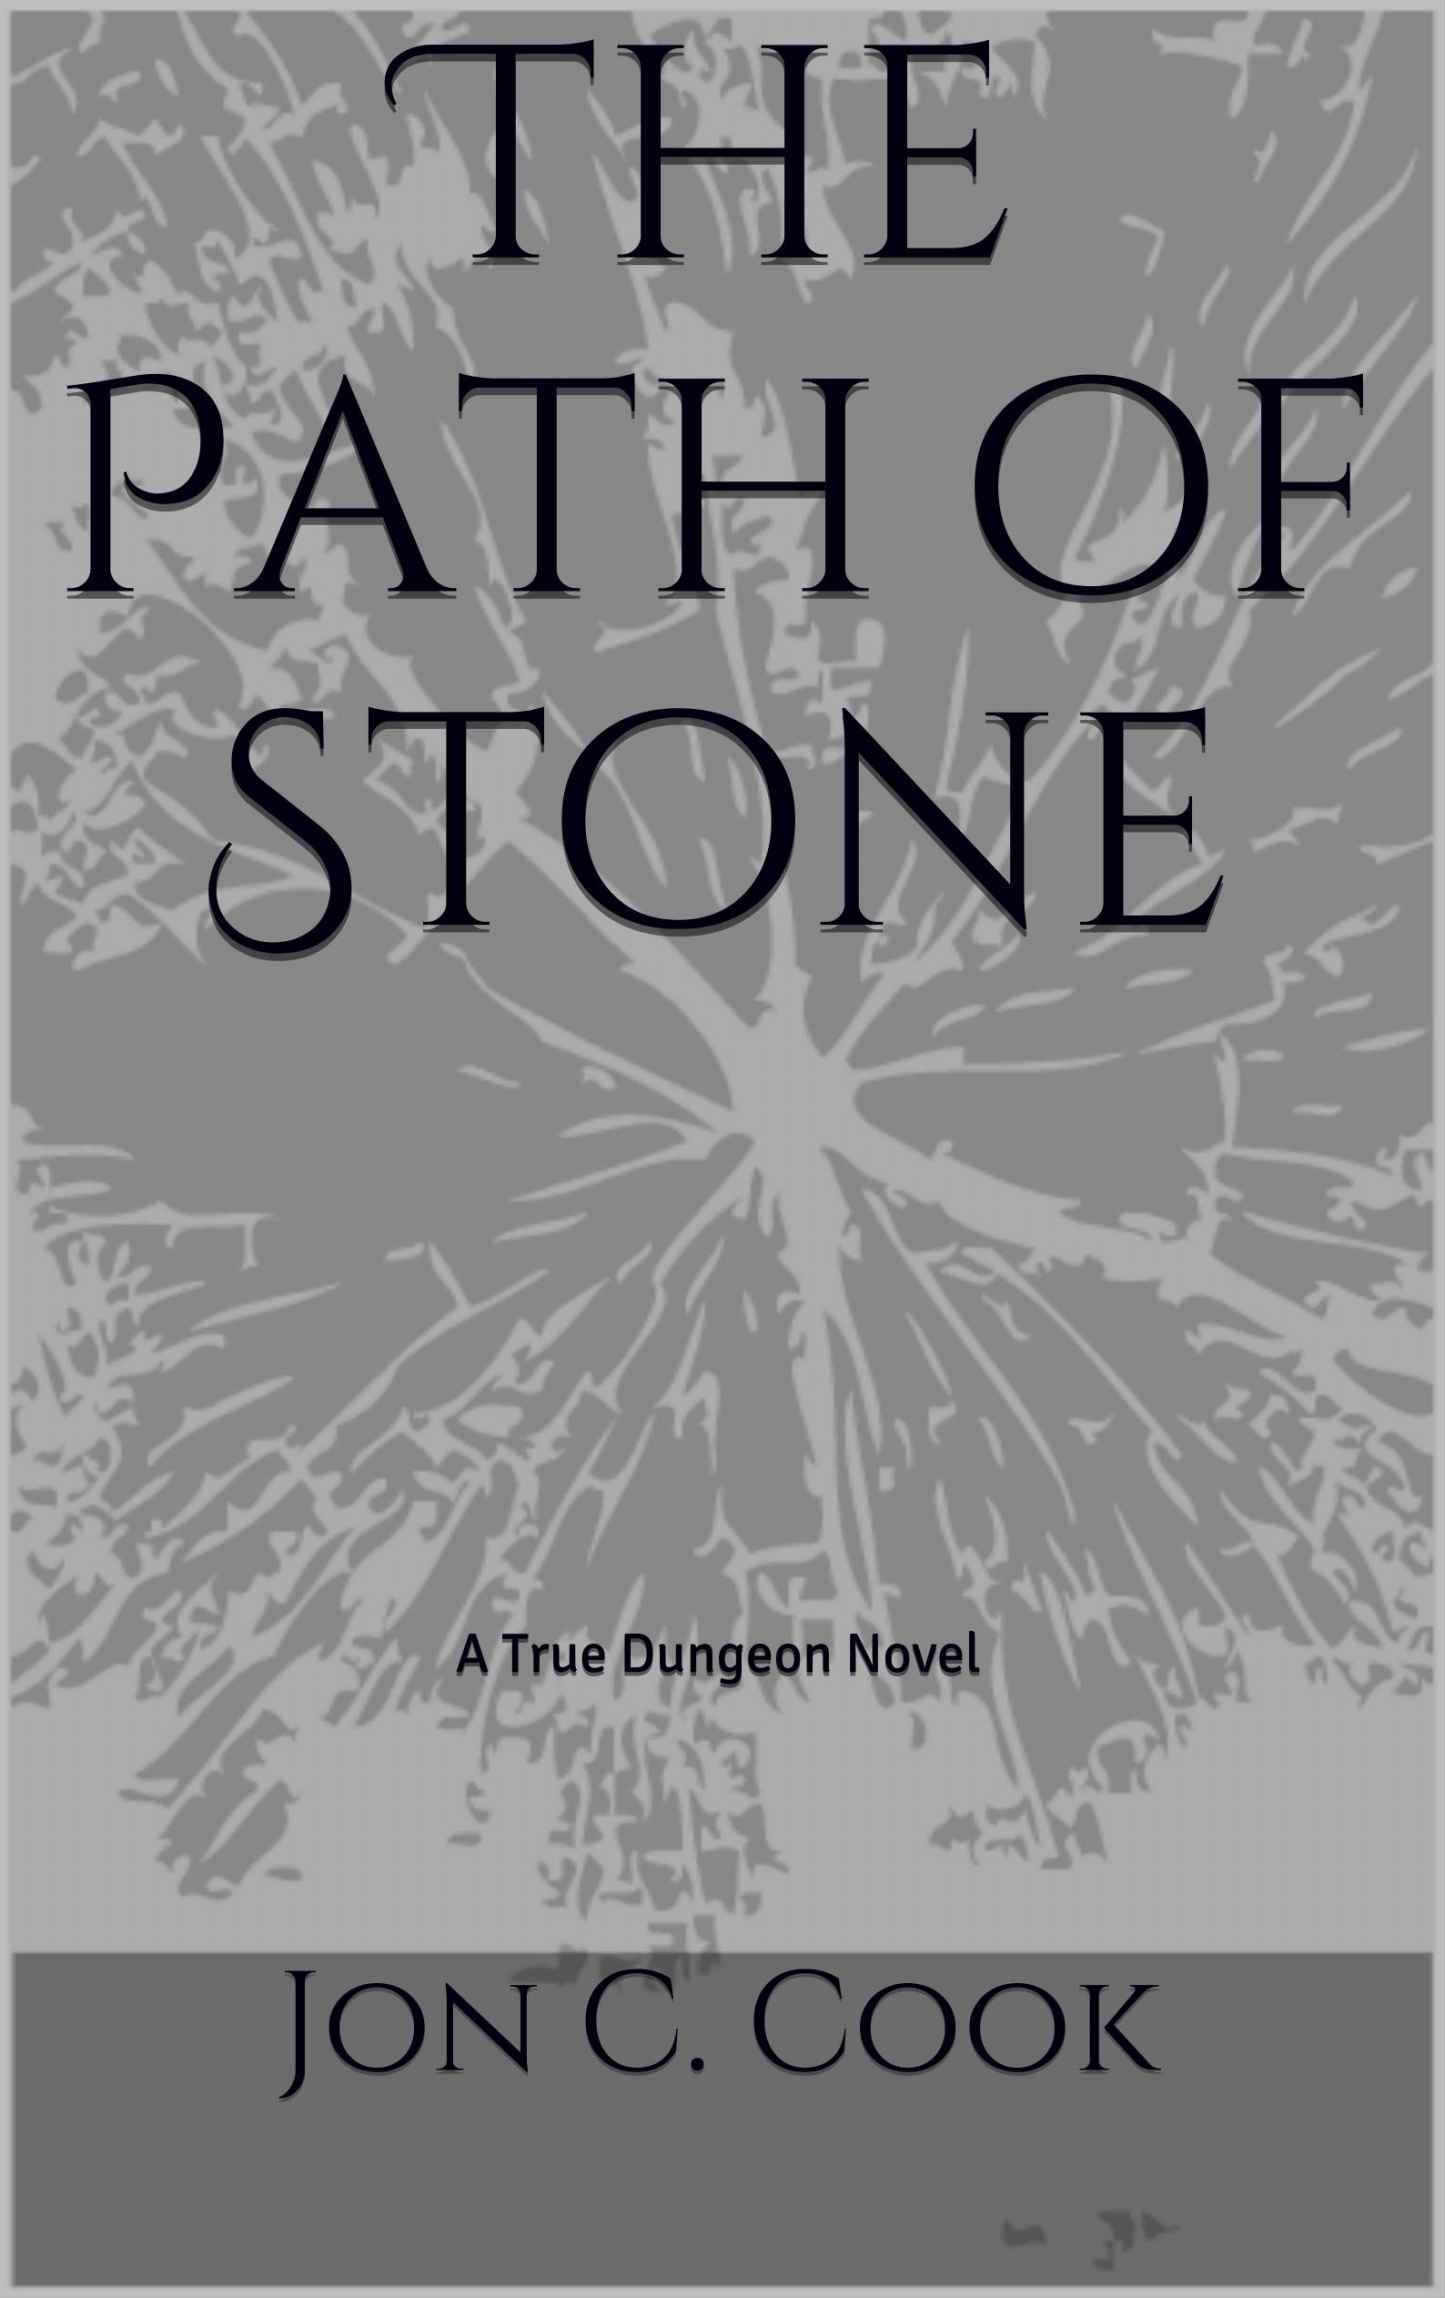 The Path of Stone by Jon C. Cook - Signed by author!